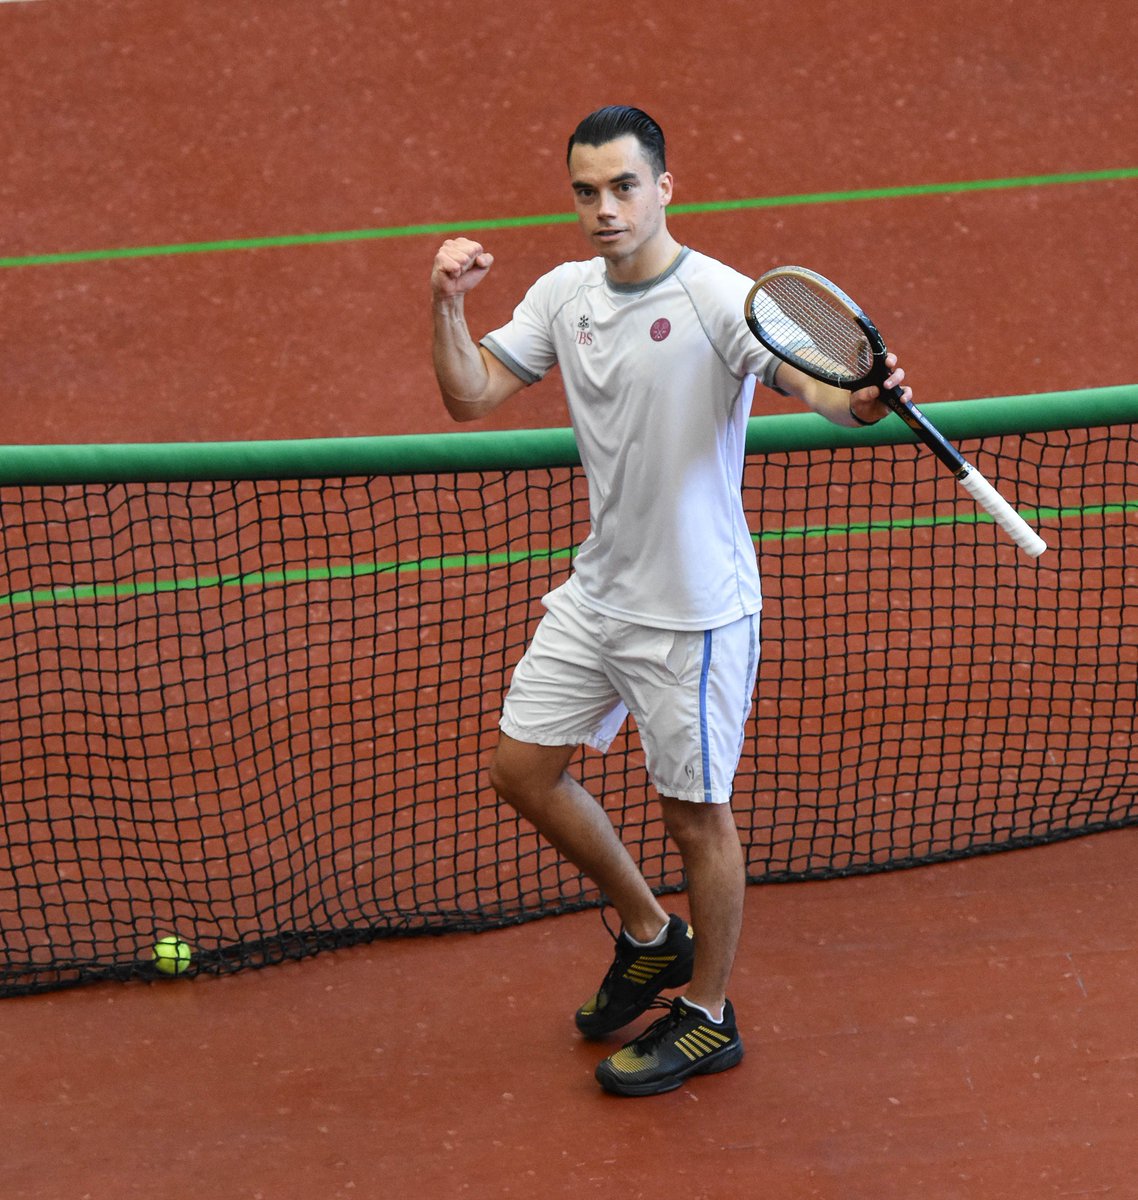 The Champions Trophy, an annual tournament presented by Mitsubishi Electric, will
bring together the world’s top Real Tennis players at the Royal Tennis Court, the 500-
year-old home of Real Tennis from 28 July to 04 August. Tickets, on sale from 15 May: buff.ly/4bsmOAt.